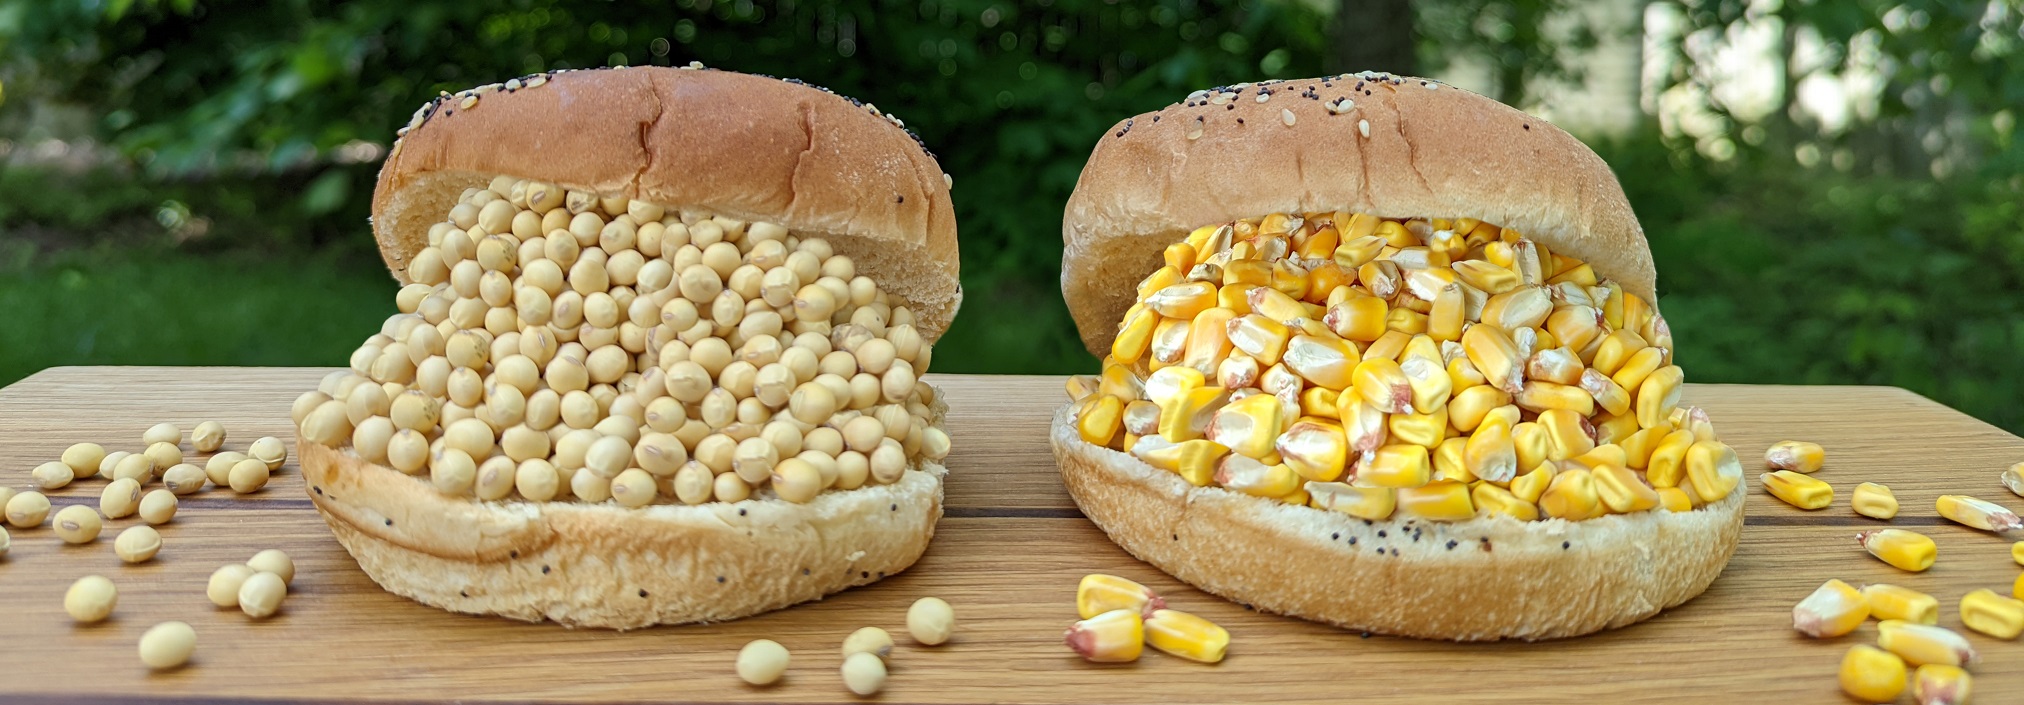 two hamburger buns, one filled with soybeans, the other with corn